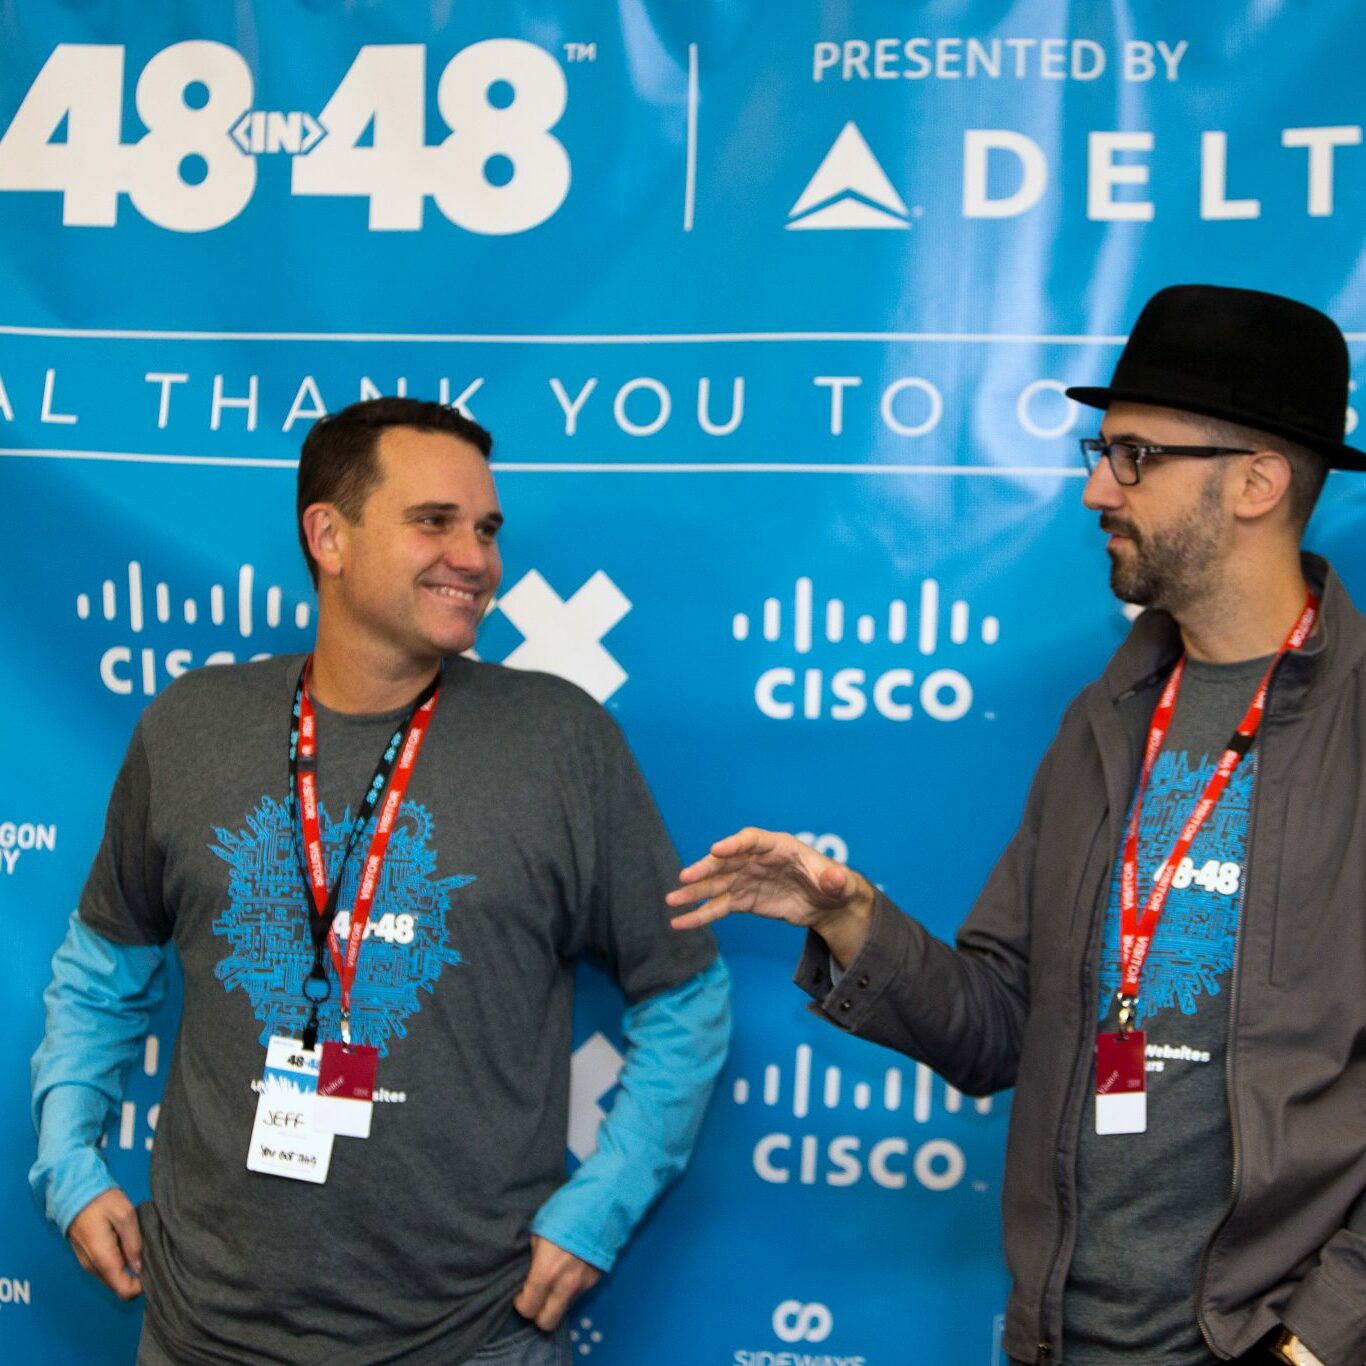 LONDON, UNITED KINGDOM - NOVEMBER 4:  Jeff Hilimire (L) and Adam Walker (R), speaking during the 48in48 event, sponsored by Delta, in London, UK, on November 4, 2018. 48in48 is an event which seeks to help 48 non-profit companies better serve their communities with 48 websites, all in 48 hours, and all with the help of volunteers.